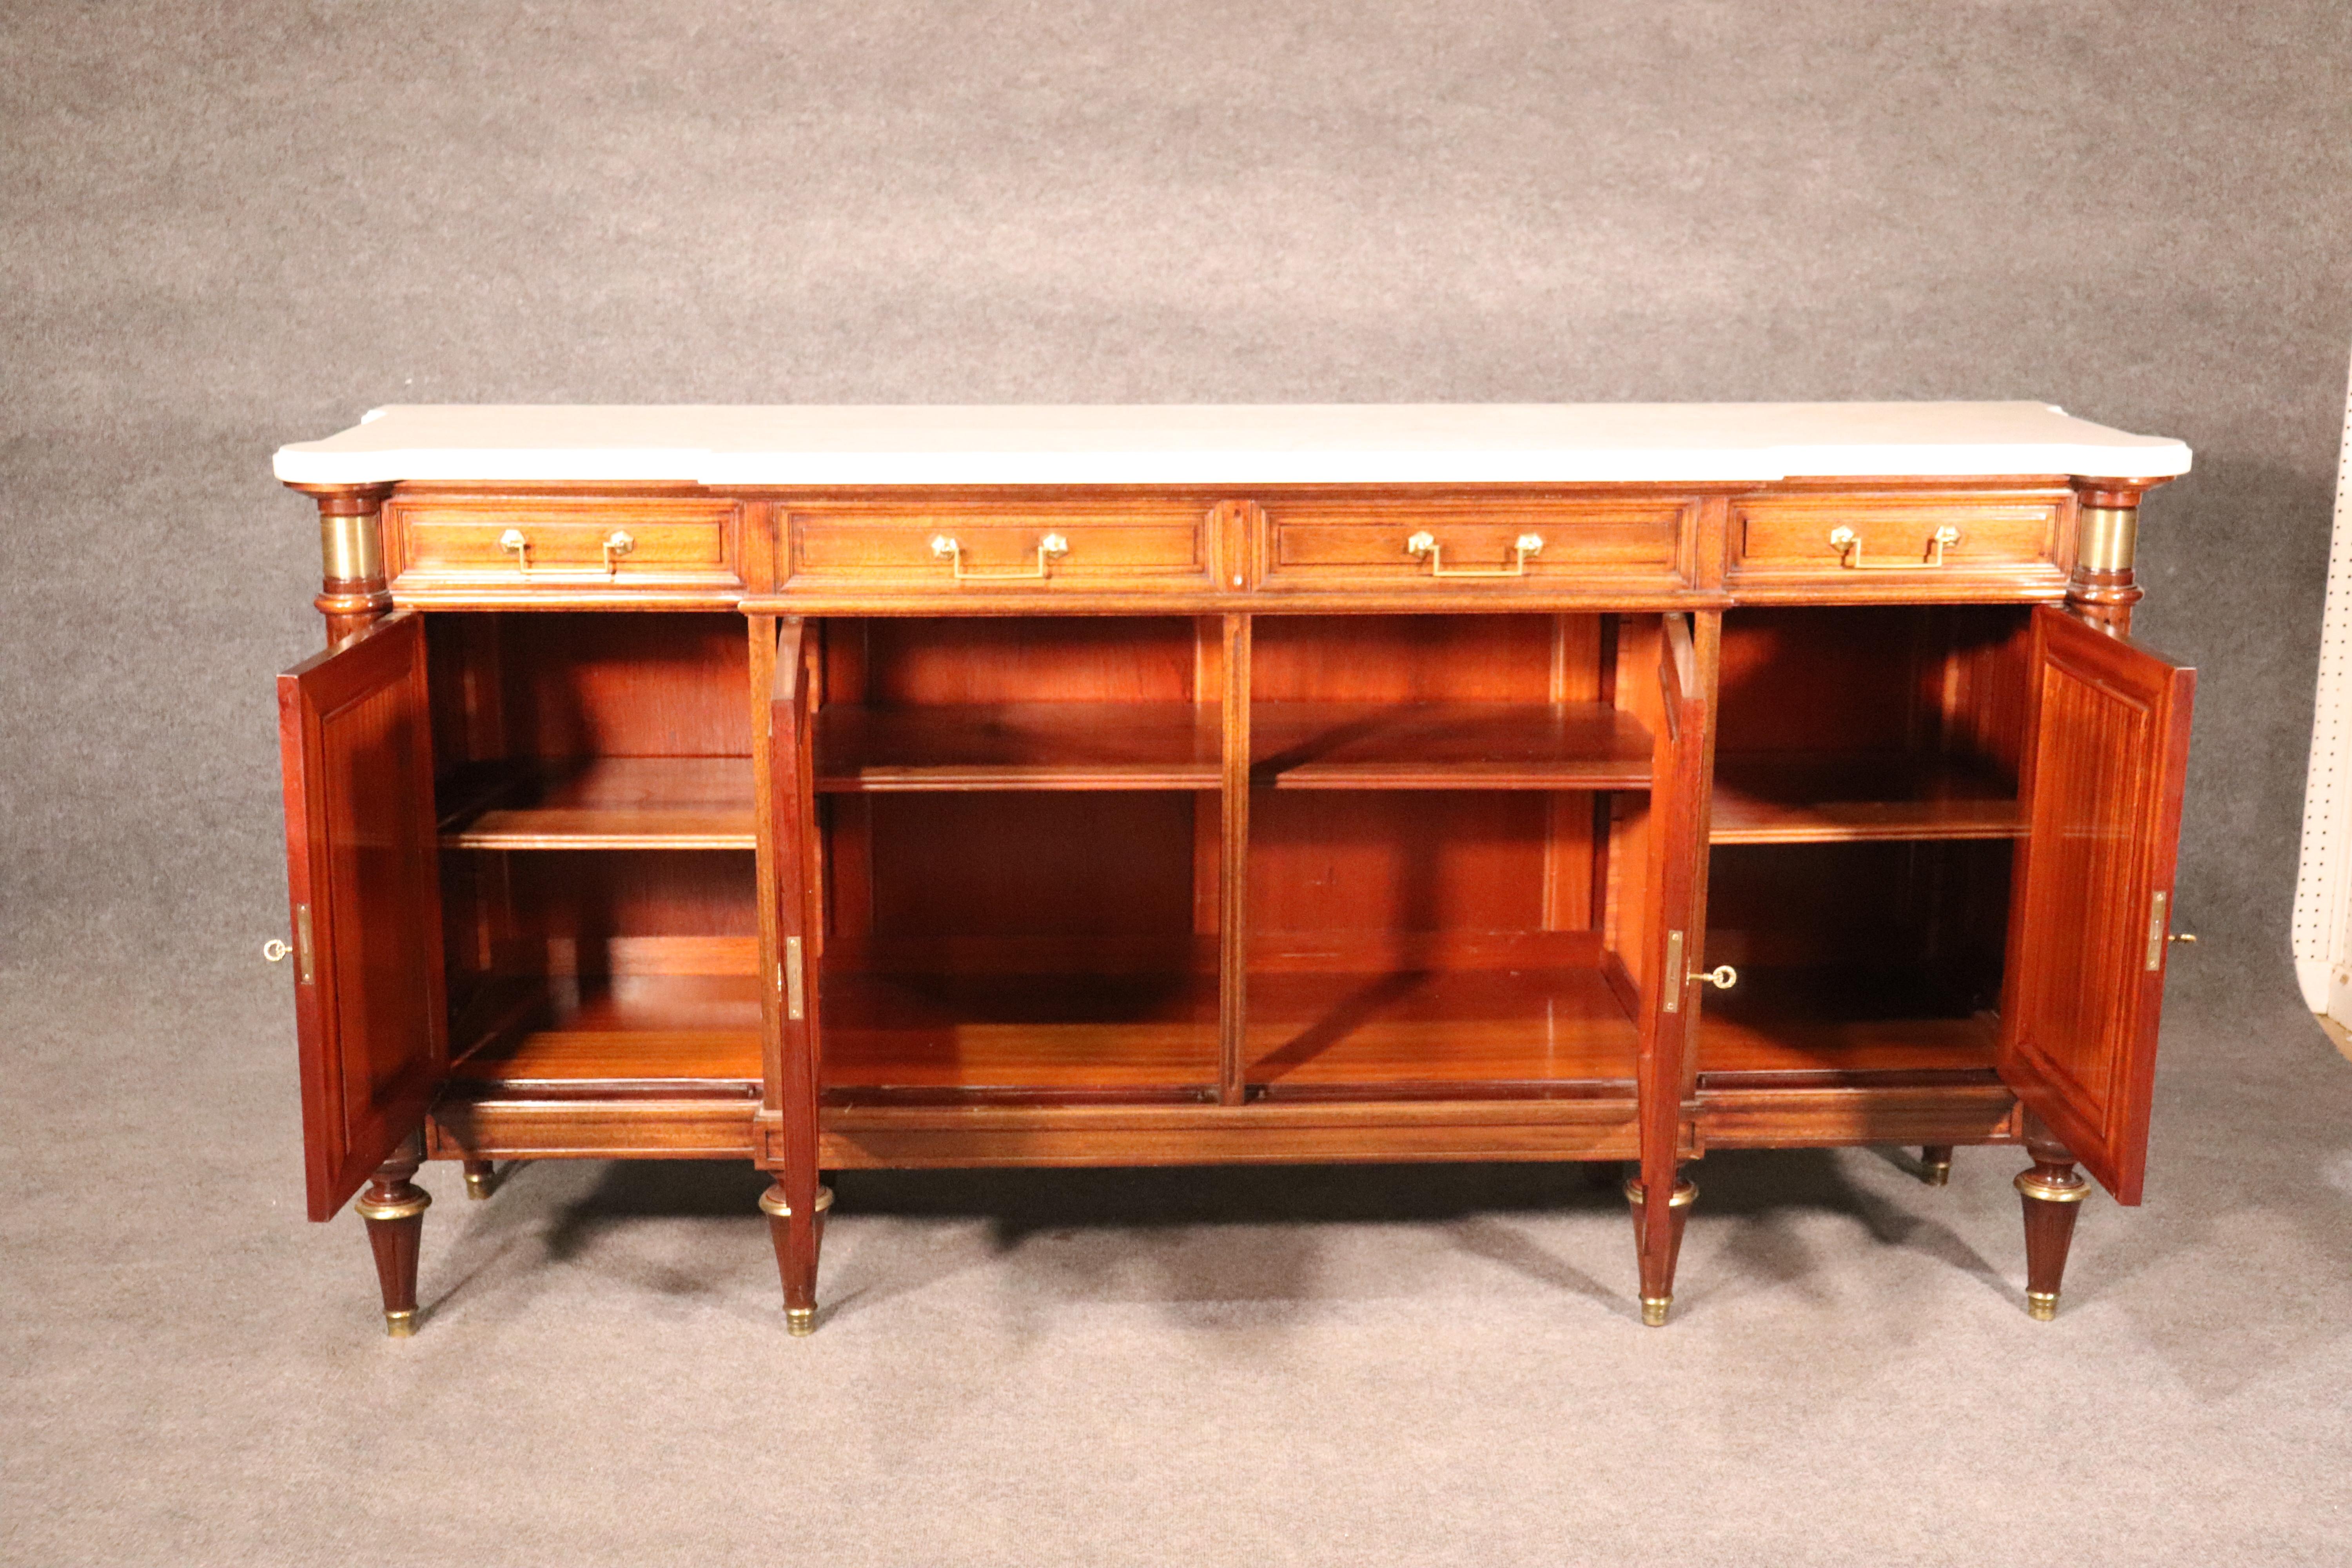 This Louis XVI or Directoire style sideboard features beautiful plum pudding mahogany and a gorgeous color. The color is a medium 